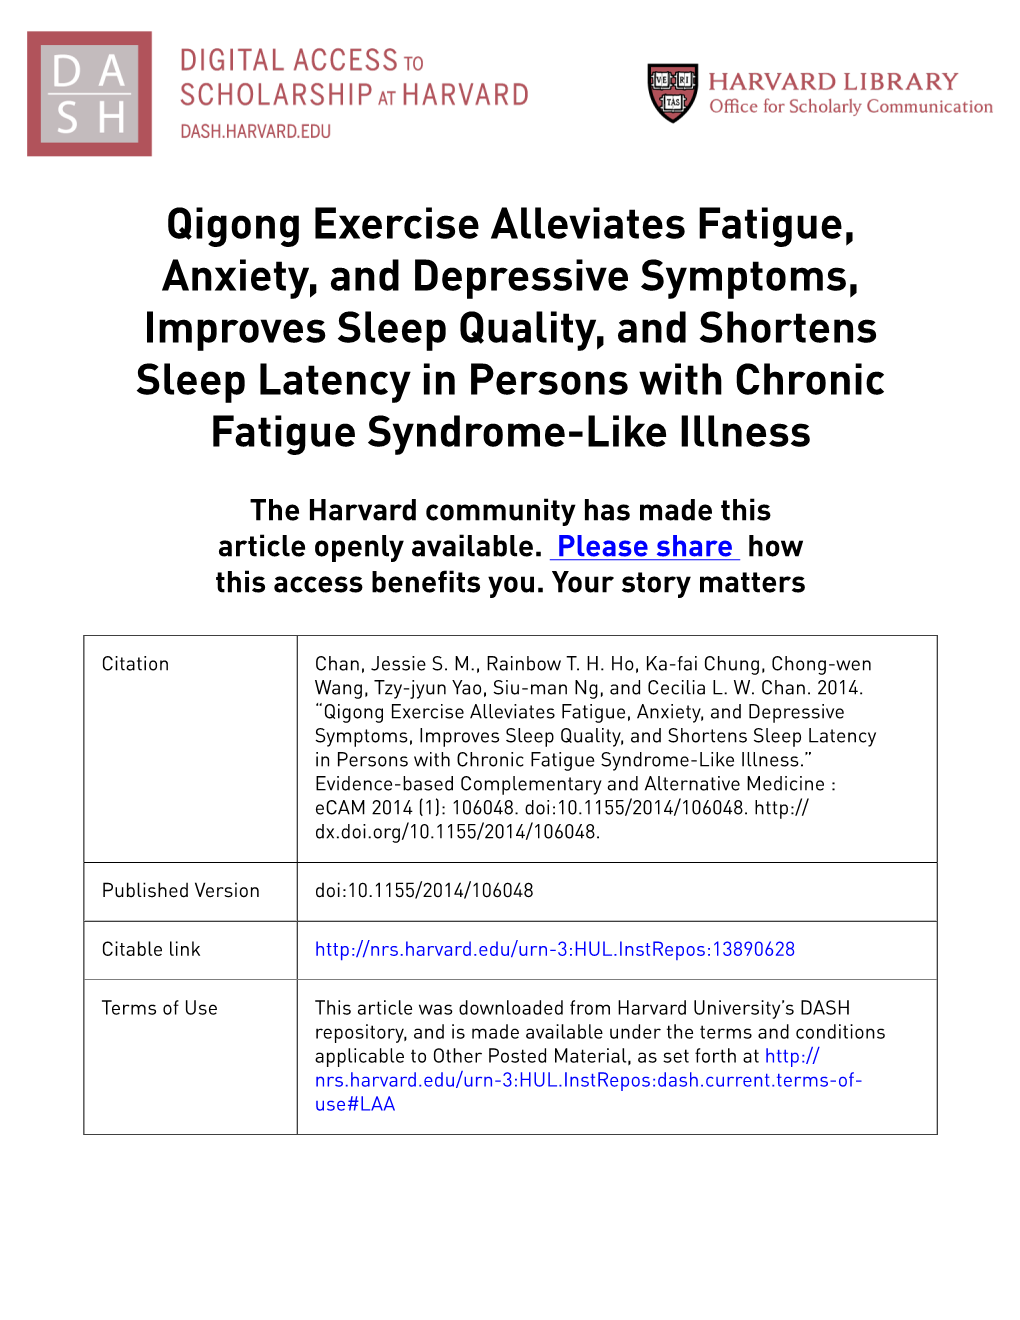 Qigong Exercise Alleviates Fatigue, Anxiety, and Depressive Symptoms